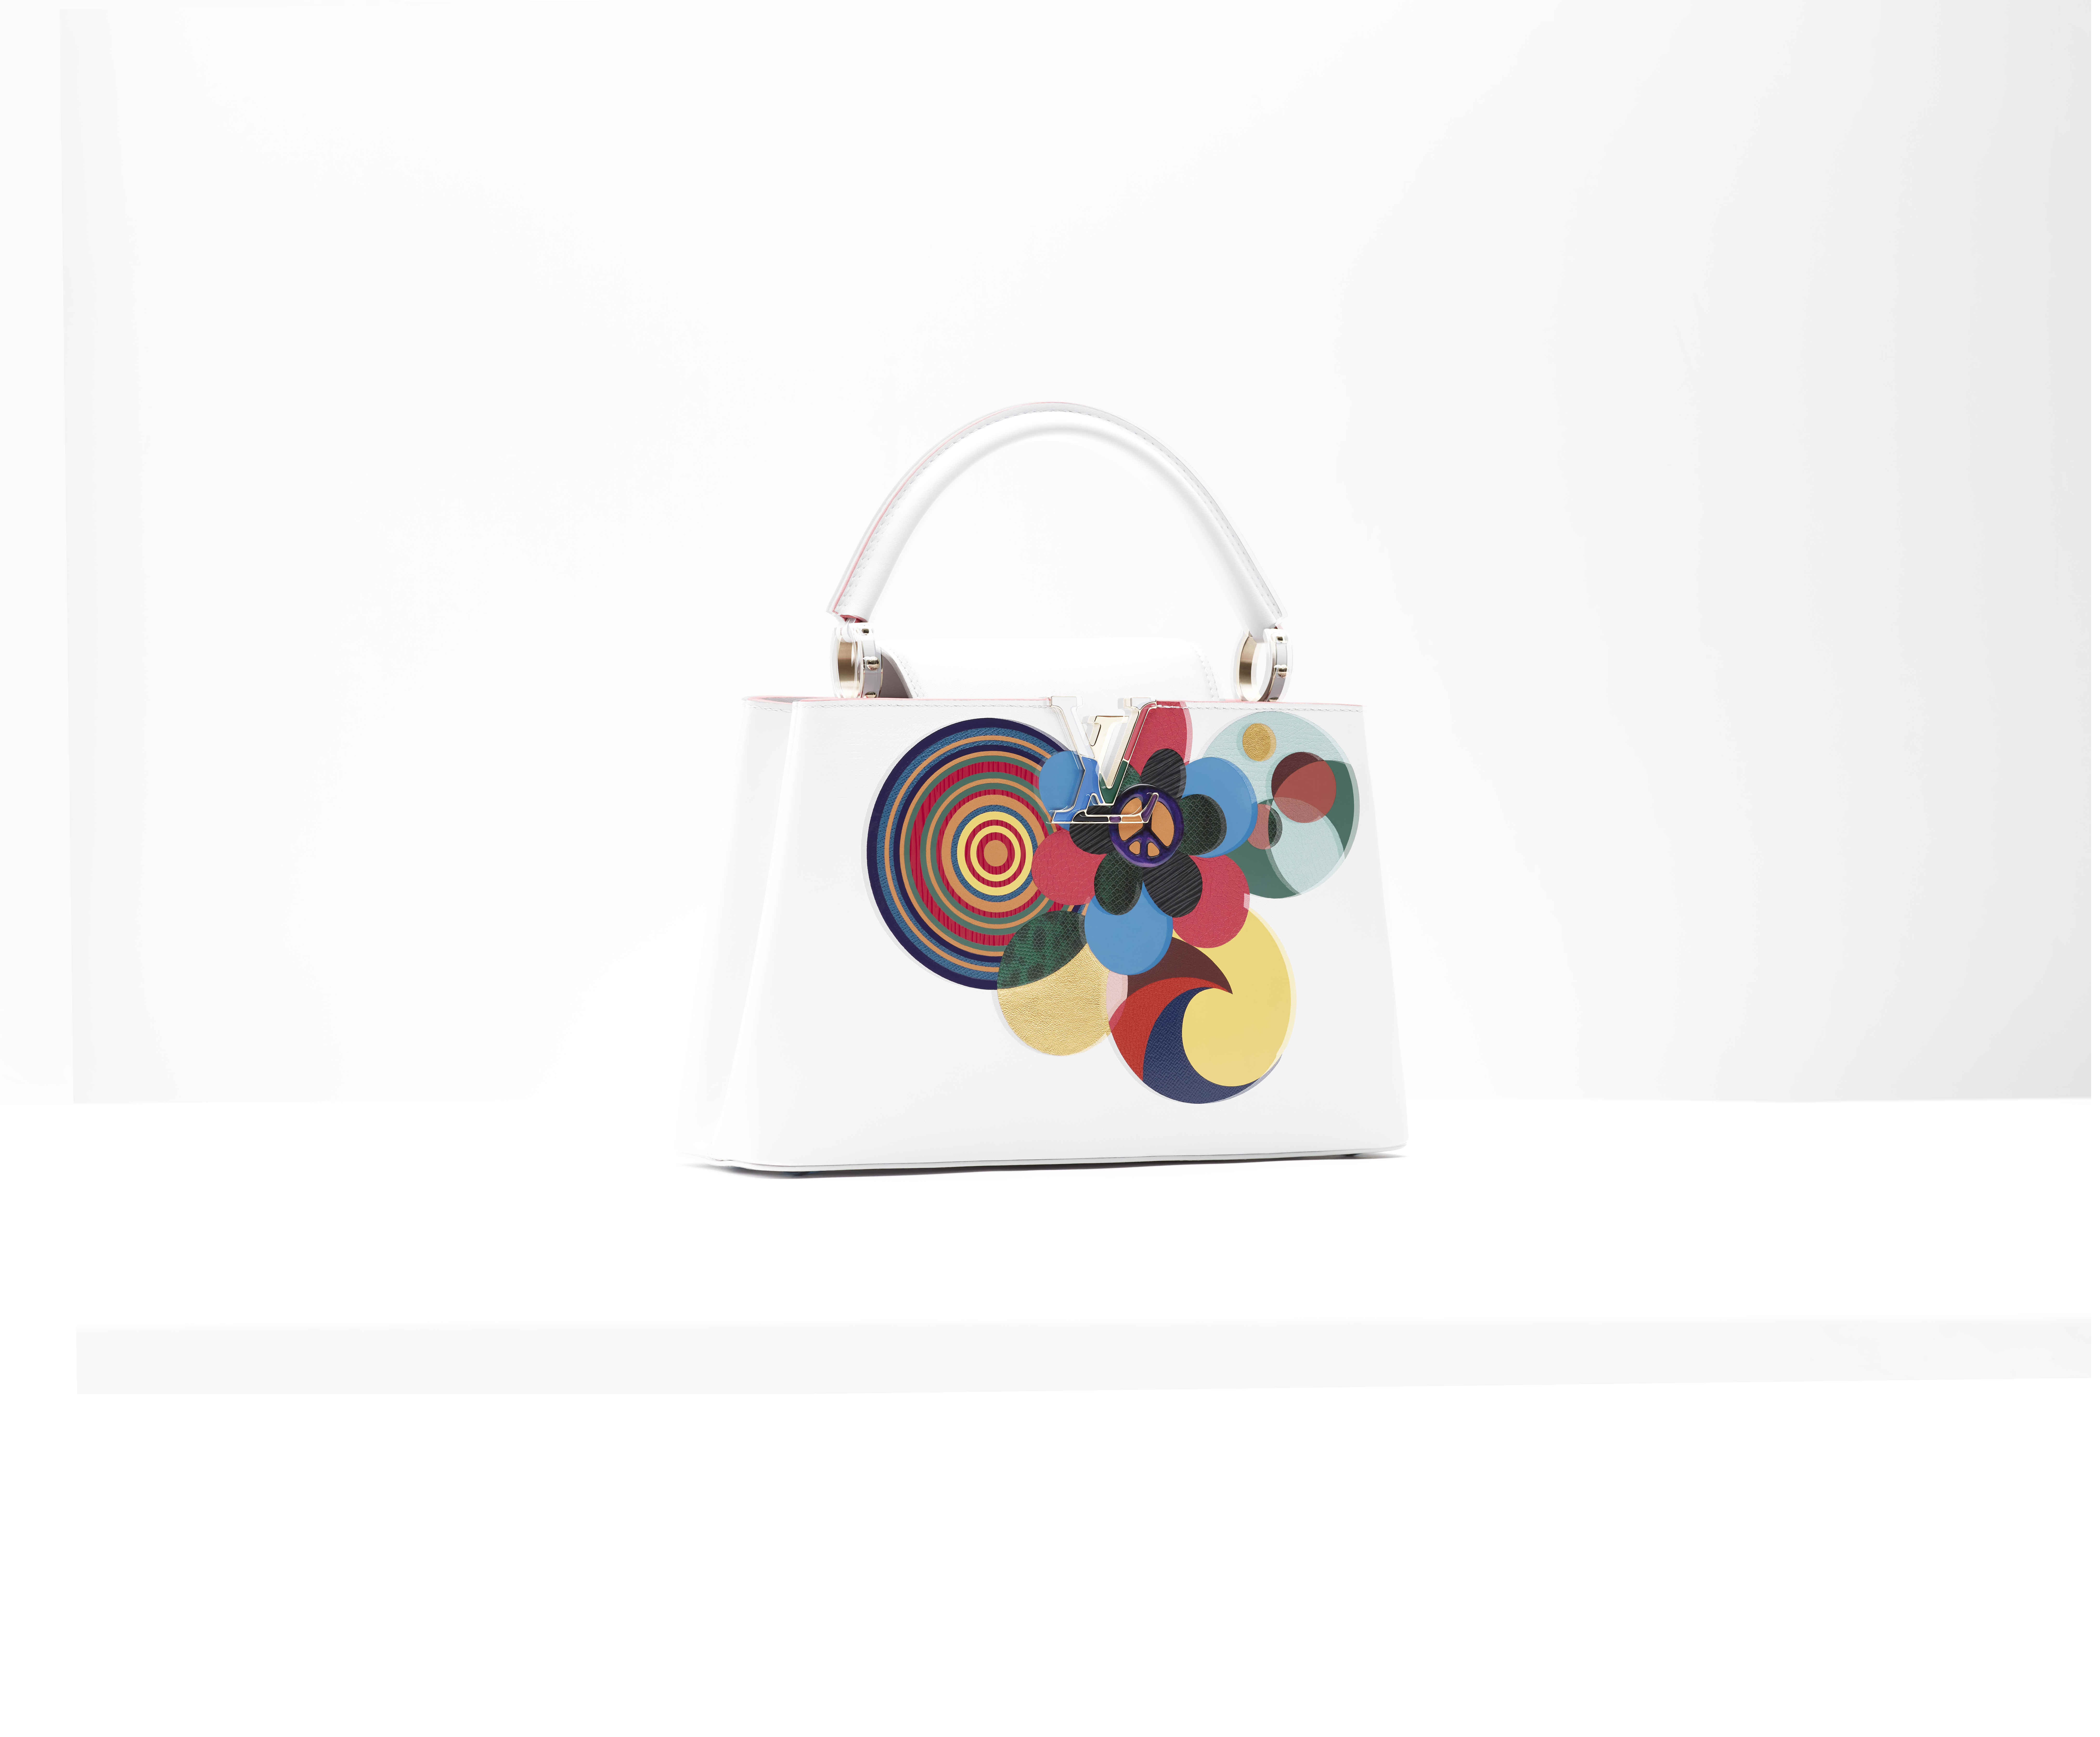 Louis Vuitton - Artycapucines Collection - New Art Editions